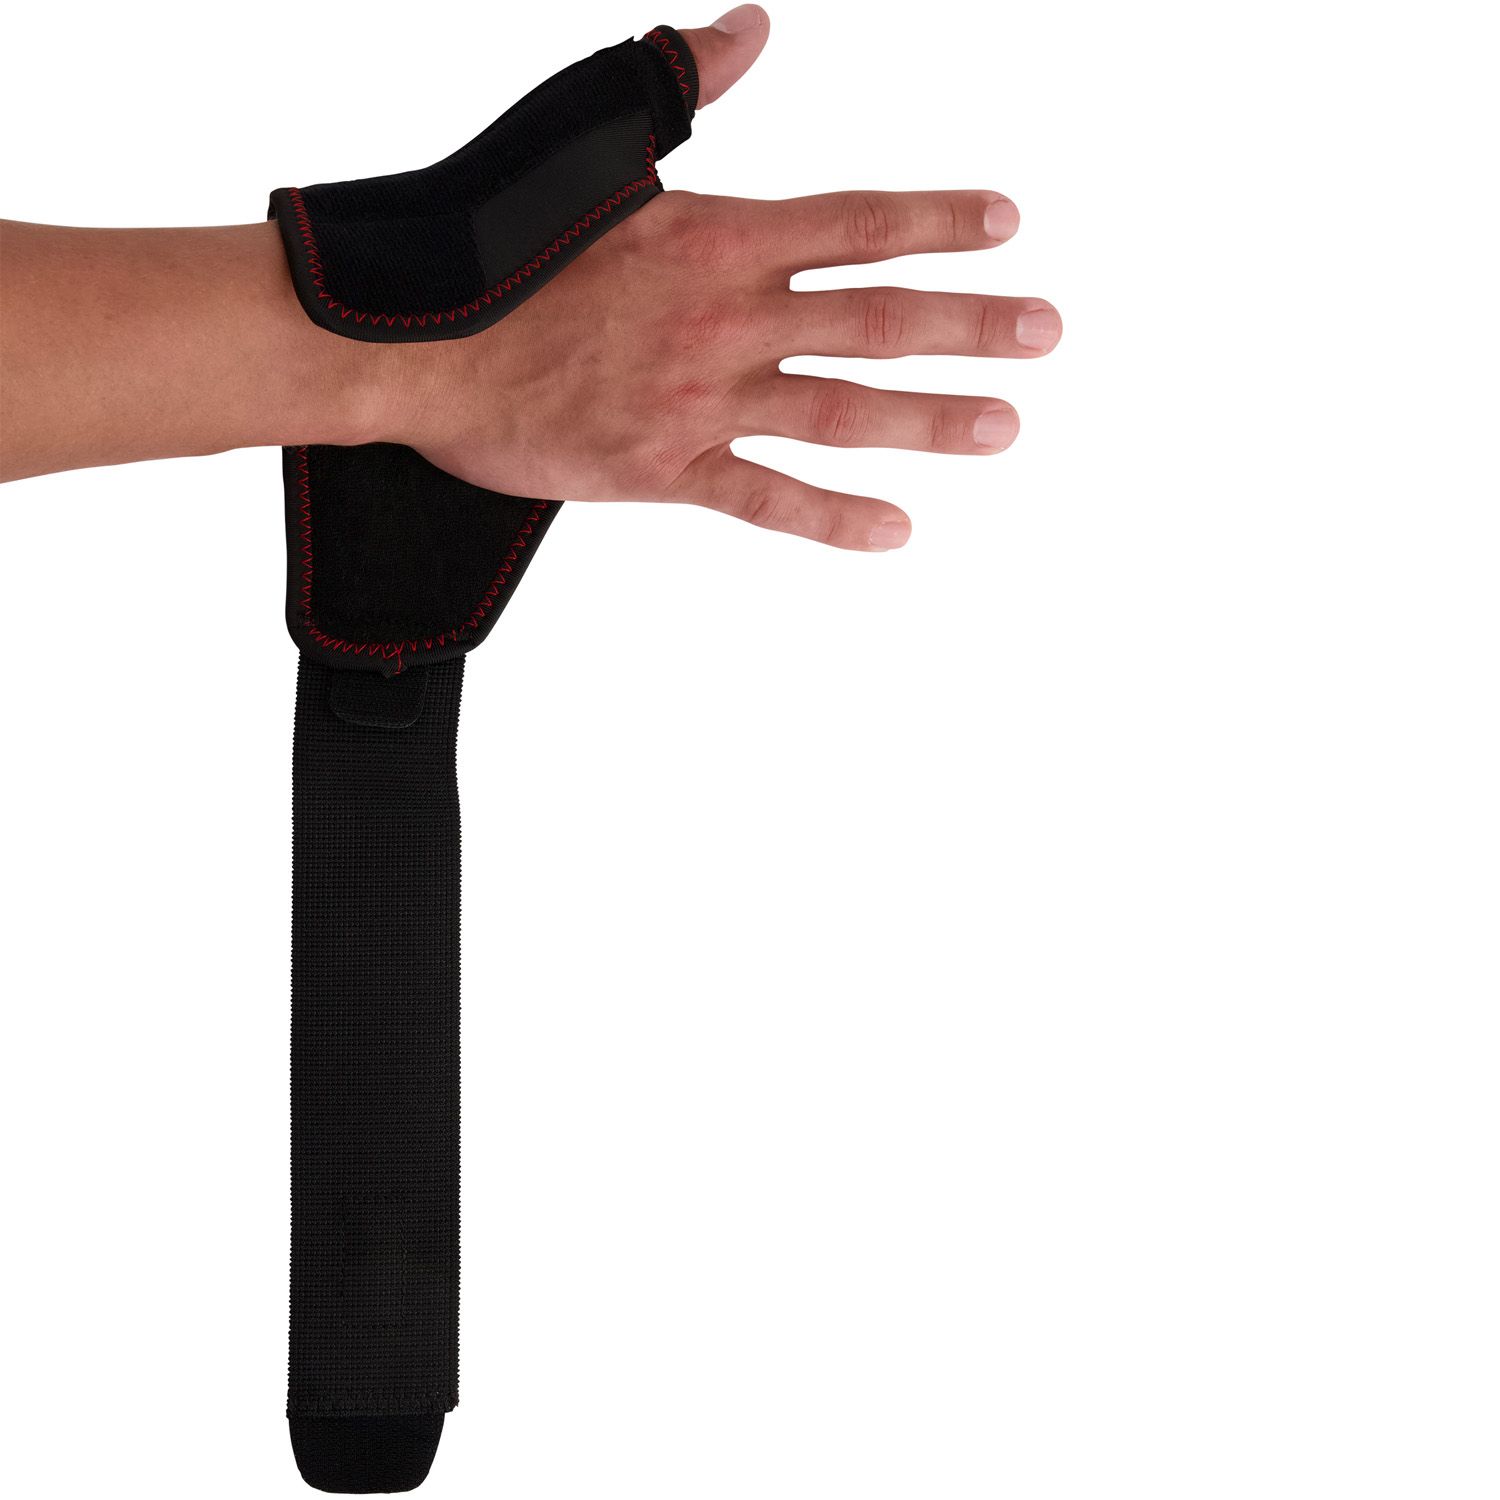 gladiator sports thumb wrist support unwrapped